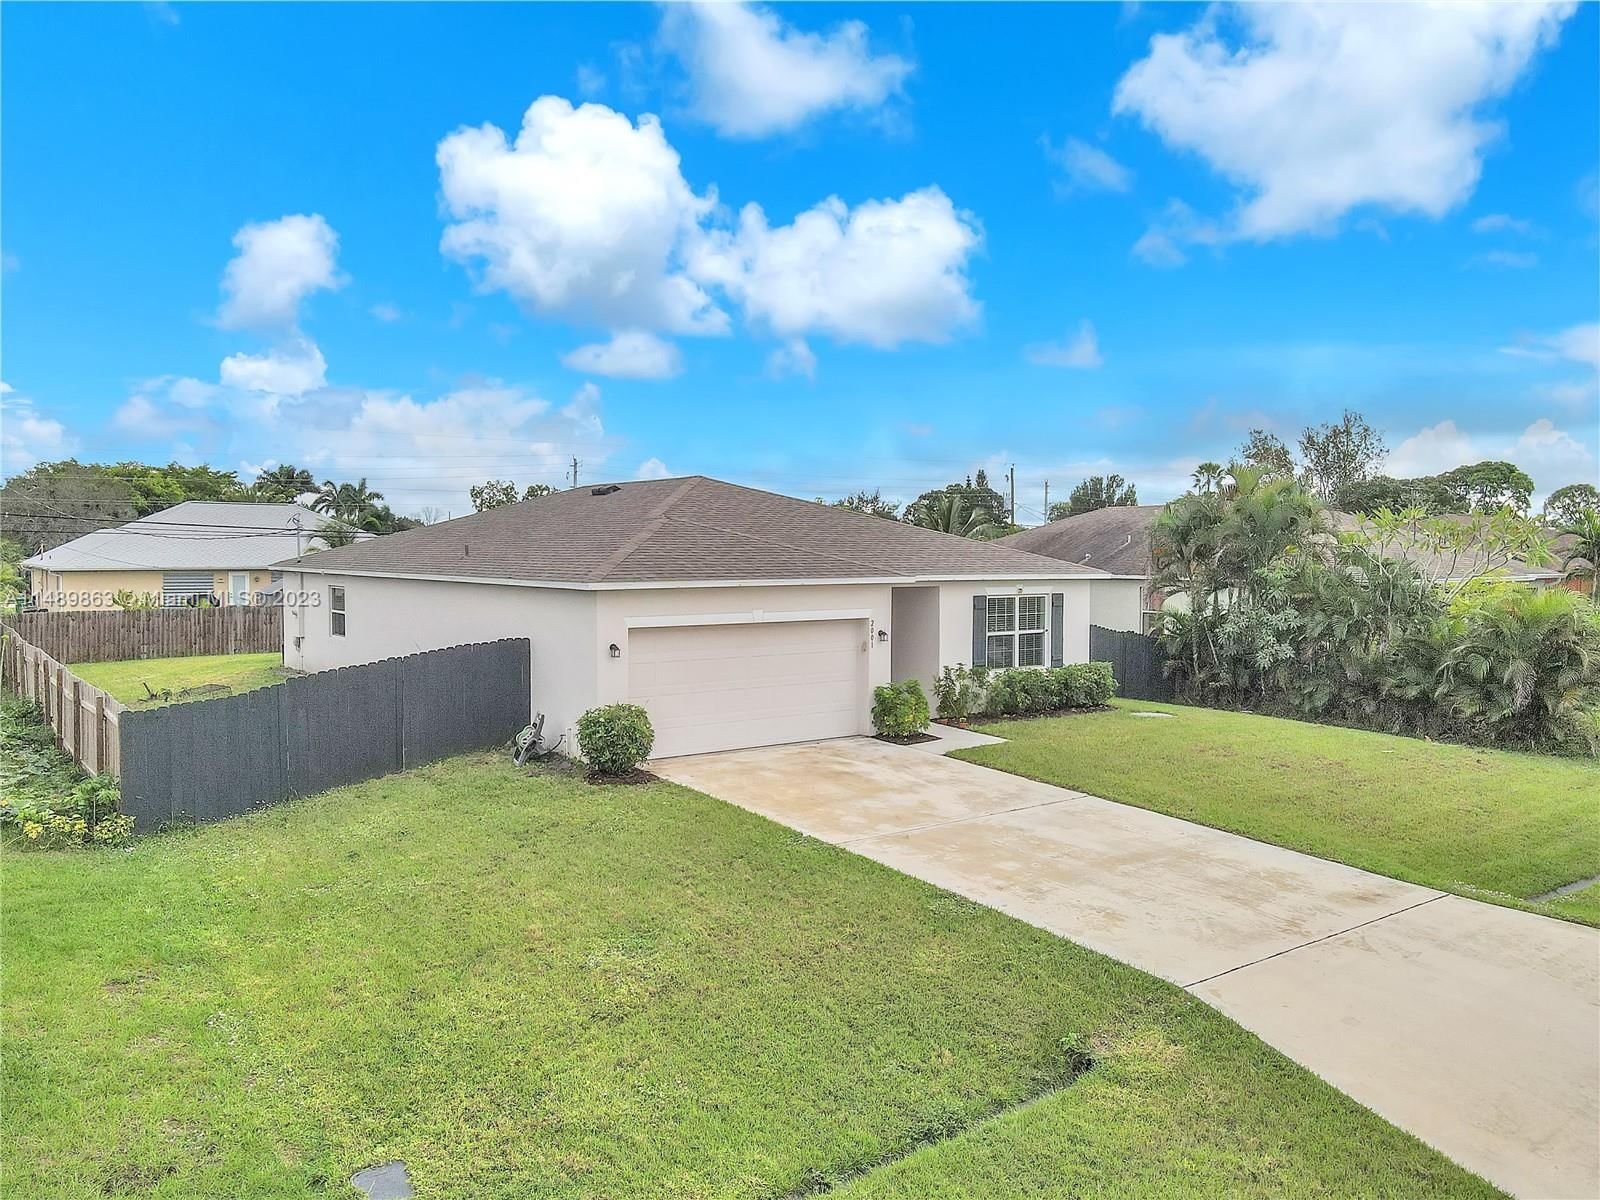 Real estate property located at 2001 Monterrey Ln, St Lucie County, PORT ST LUCIE SECTION 9, Port St. Lucie, FL